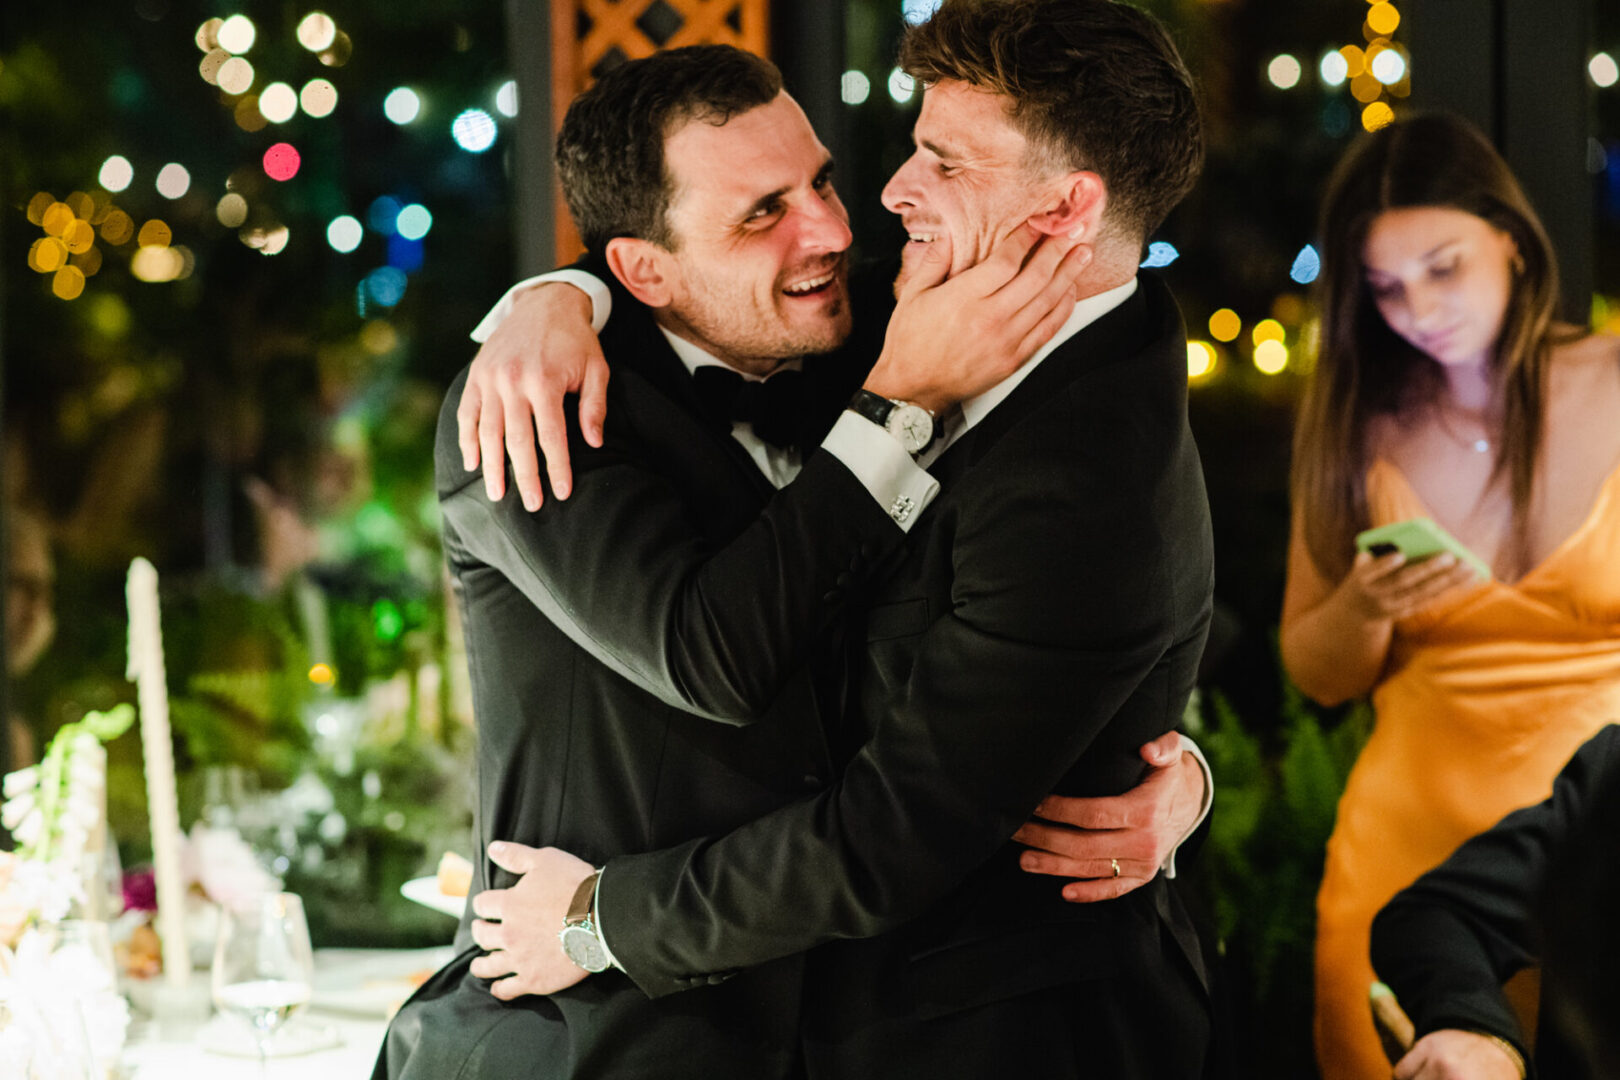 Wedding guests hugging each other